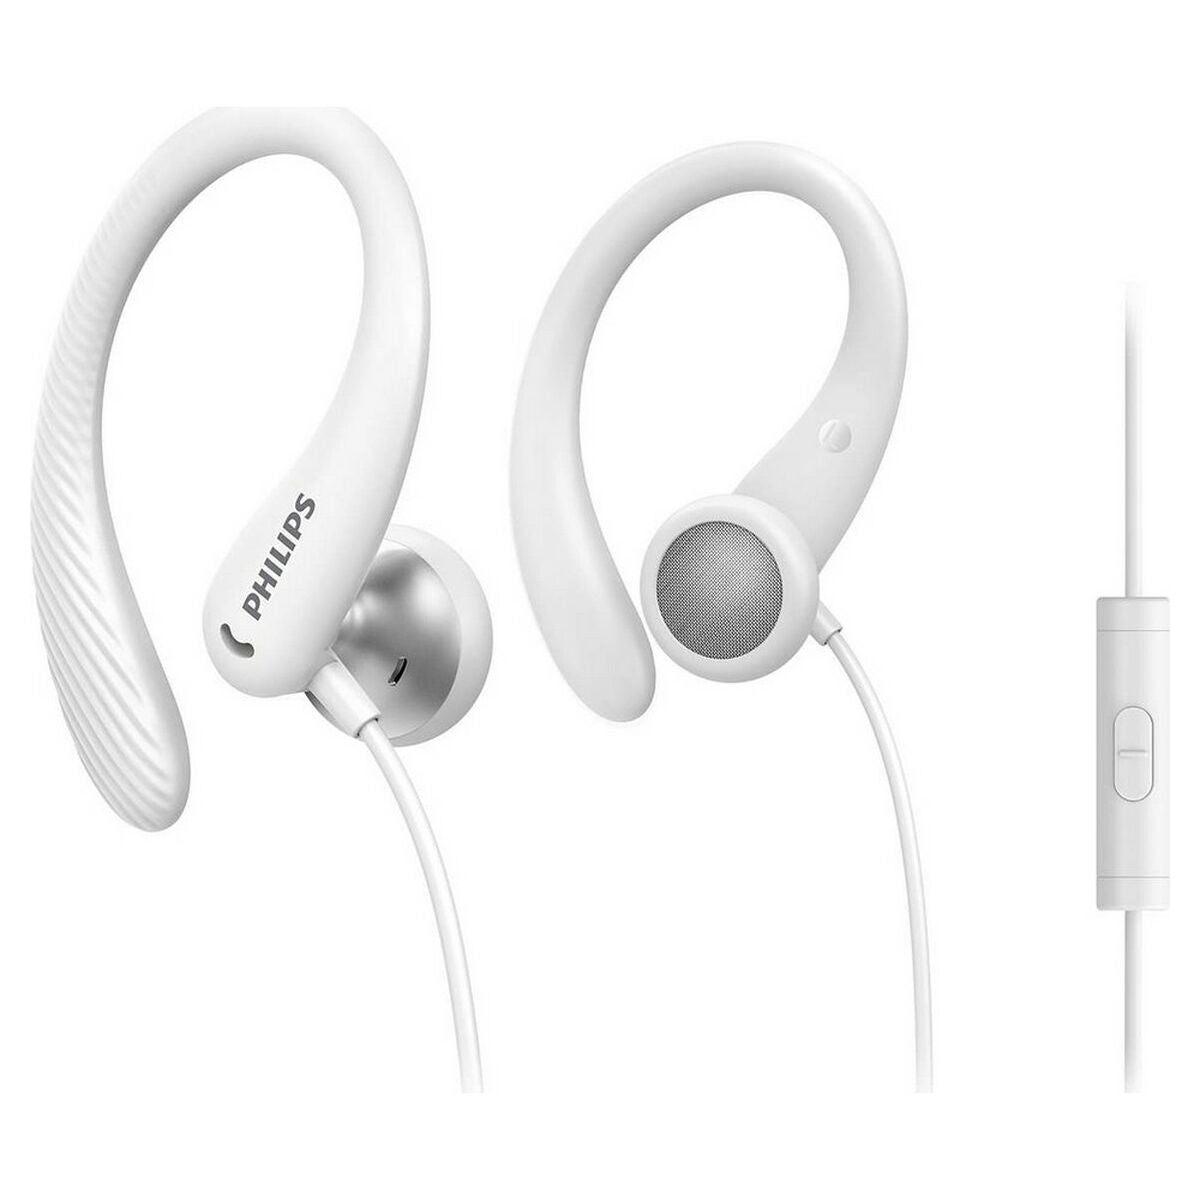 Sports headphones Philips White, Philips, Electronics, Mobile communication and accessories, sports-headphones-philips-white, Brand_Philips, category-reference-2609, category-reference-2642, category-reference-2847, category-reference-t-19653, category-reference-t-21312, category-reference-t-4036, category-reference-t-4037, computers / peripherals, Condition_NEW, entertainment, gadget, music, office, Price_20 - 50, telephones & tablets, Teleworking, RiotNook